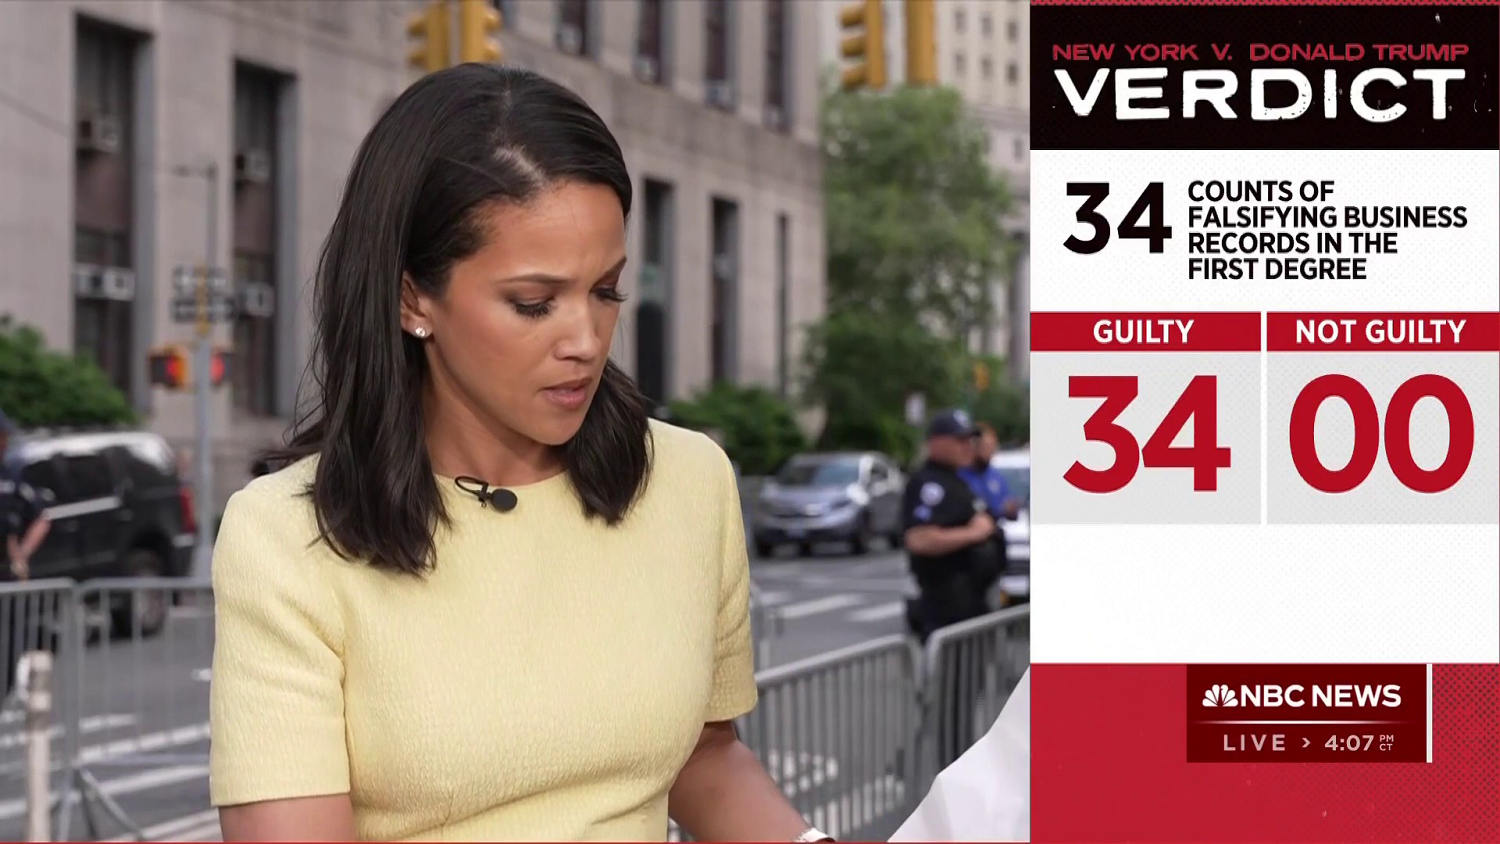 Watch NBC News' Laura Jarrett count the guilty verdicts as they come in